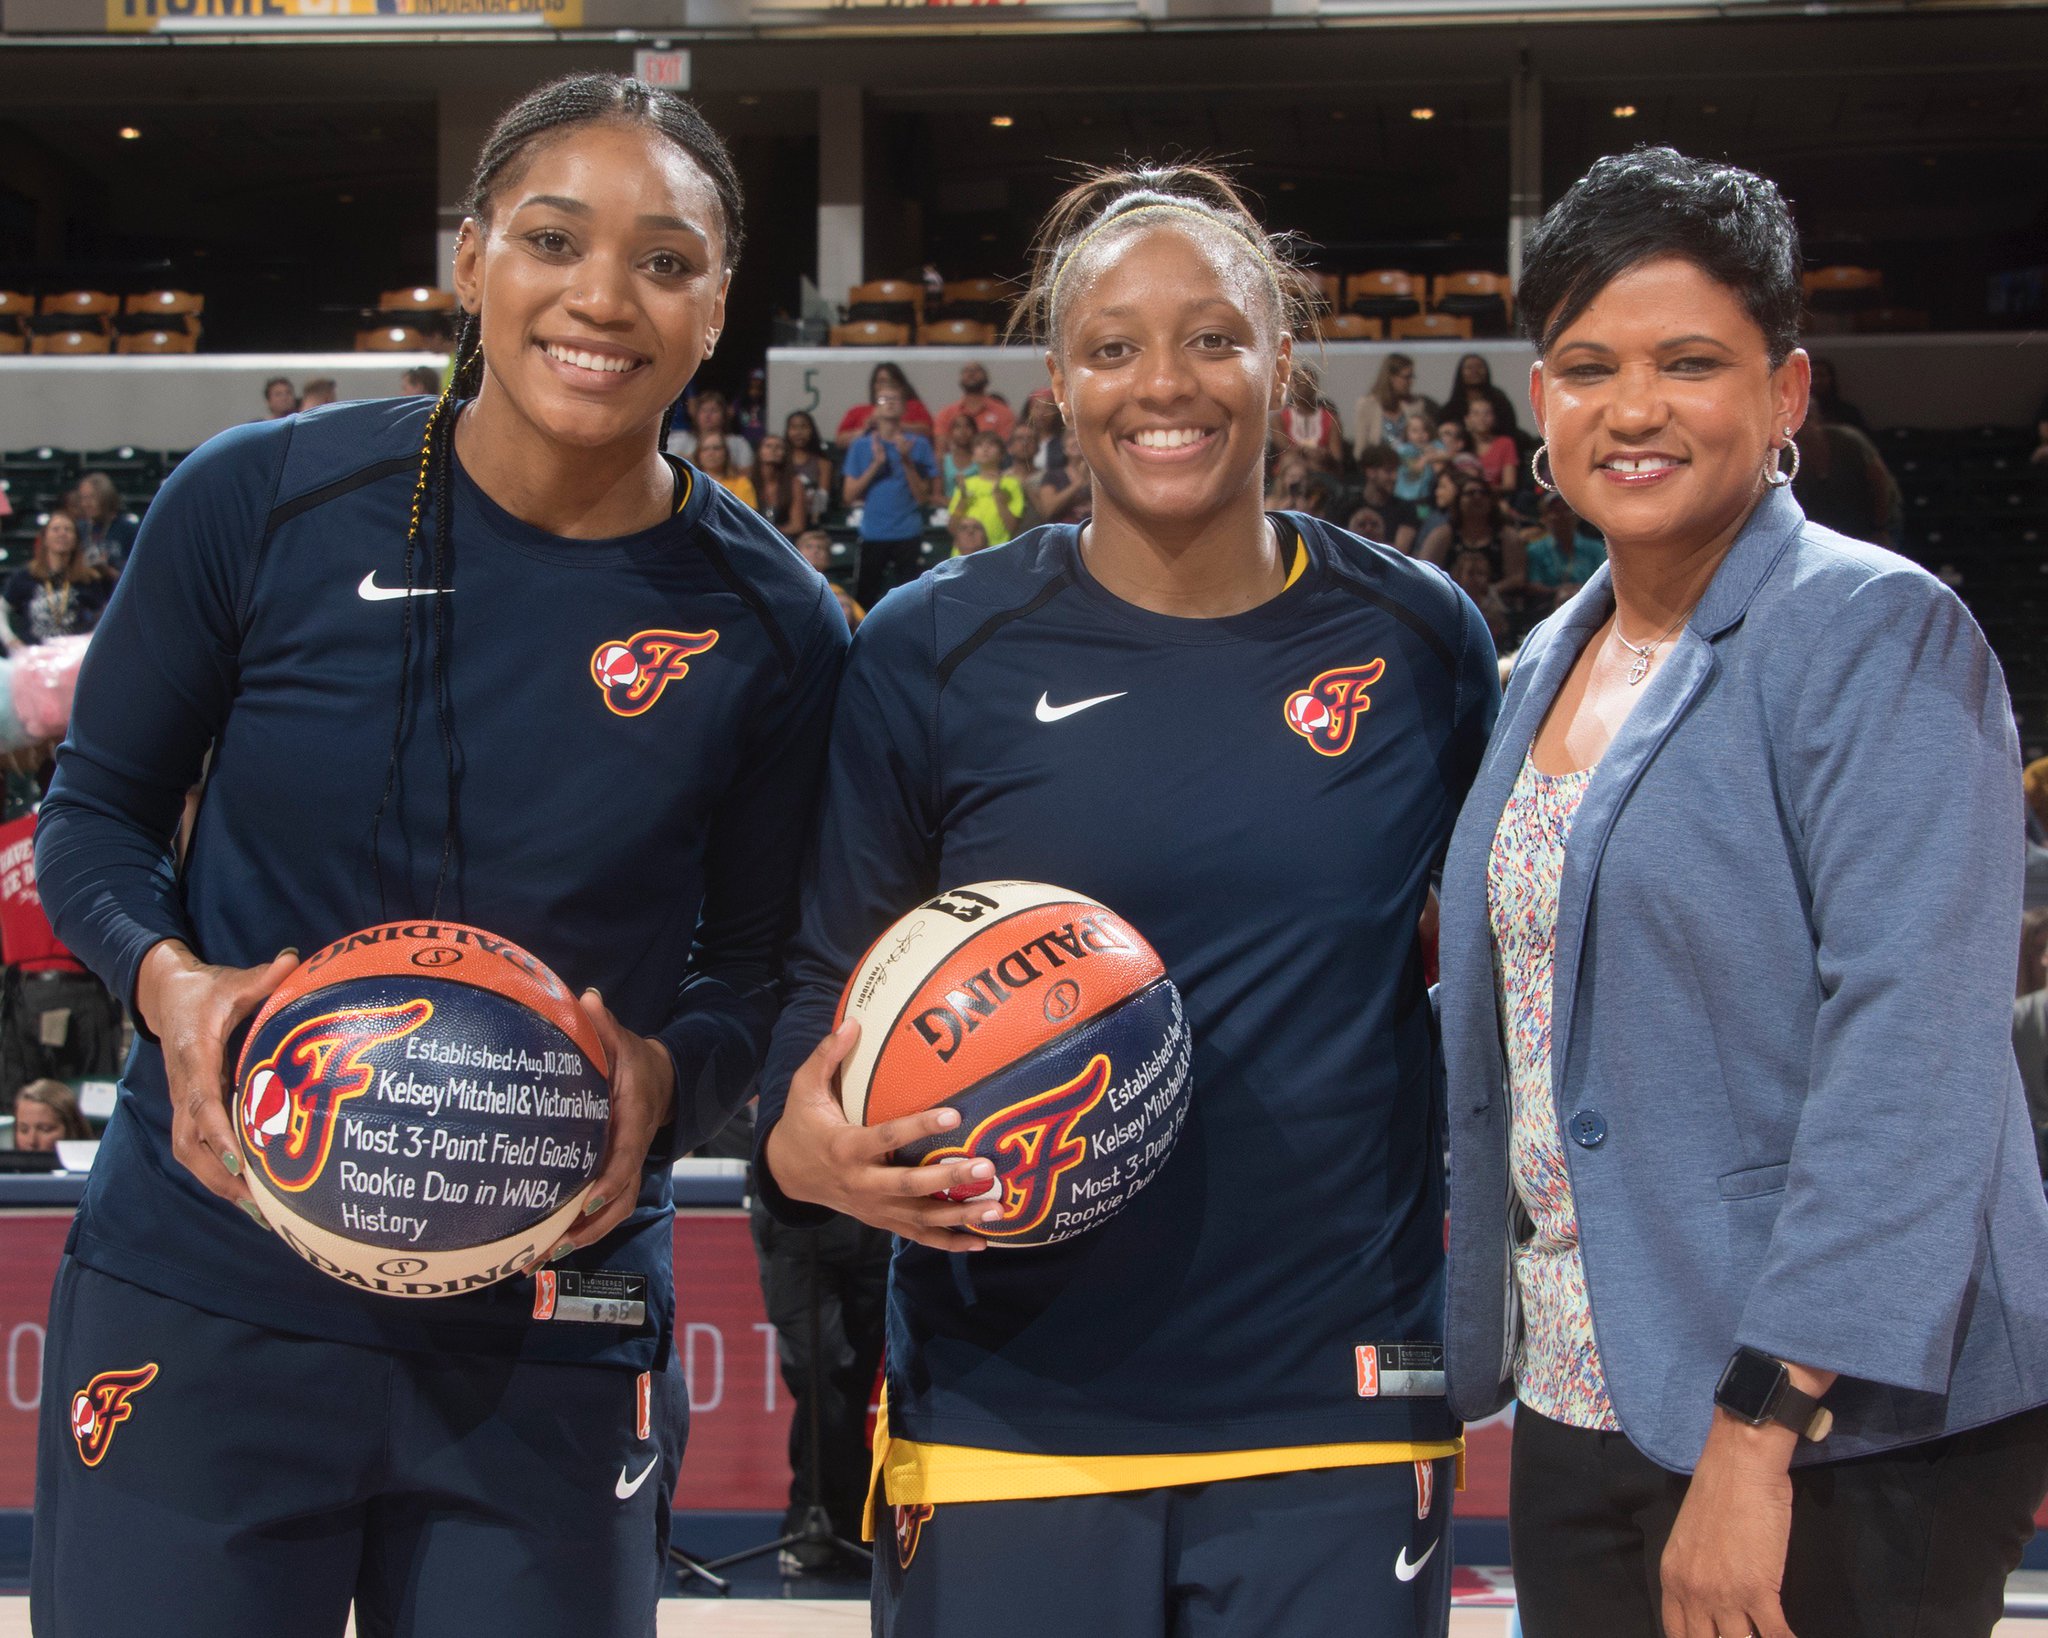 Indiana Fever on Twitter "The Fever had the opportunity to celebrate